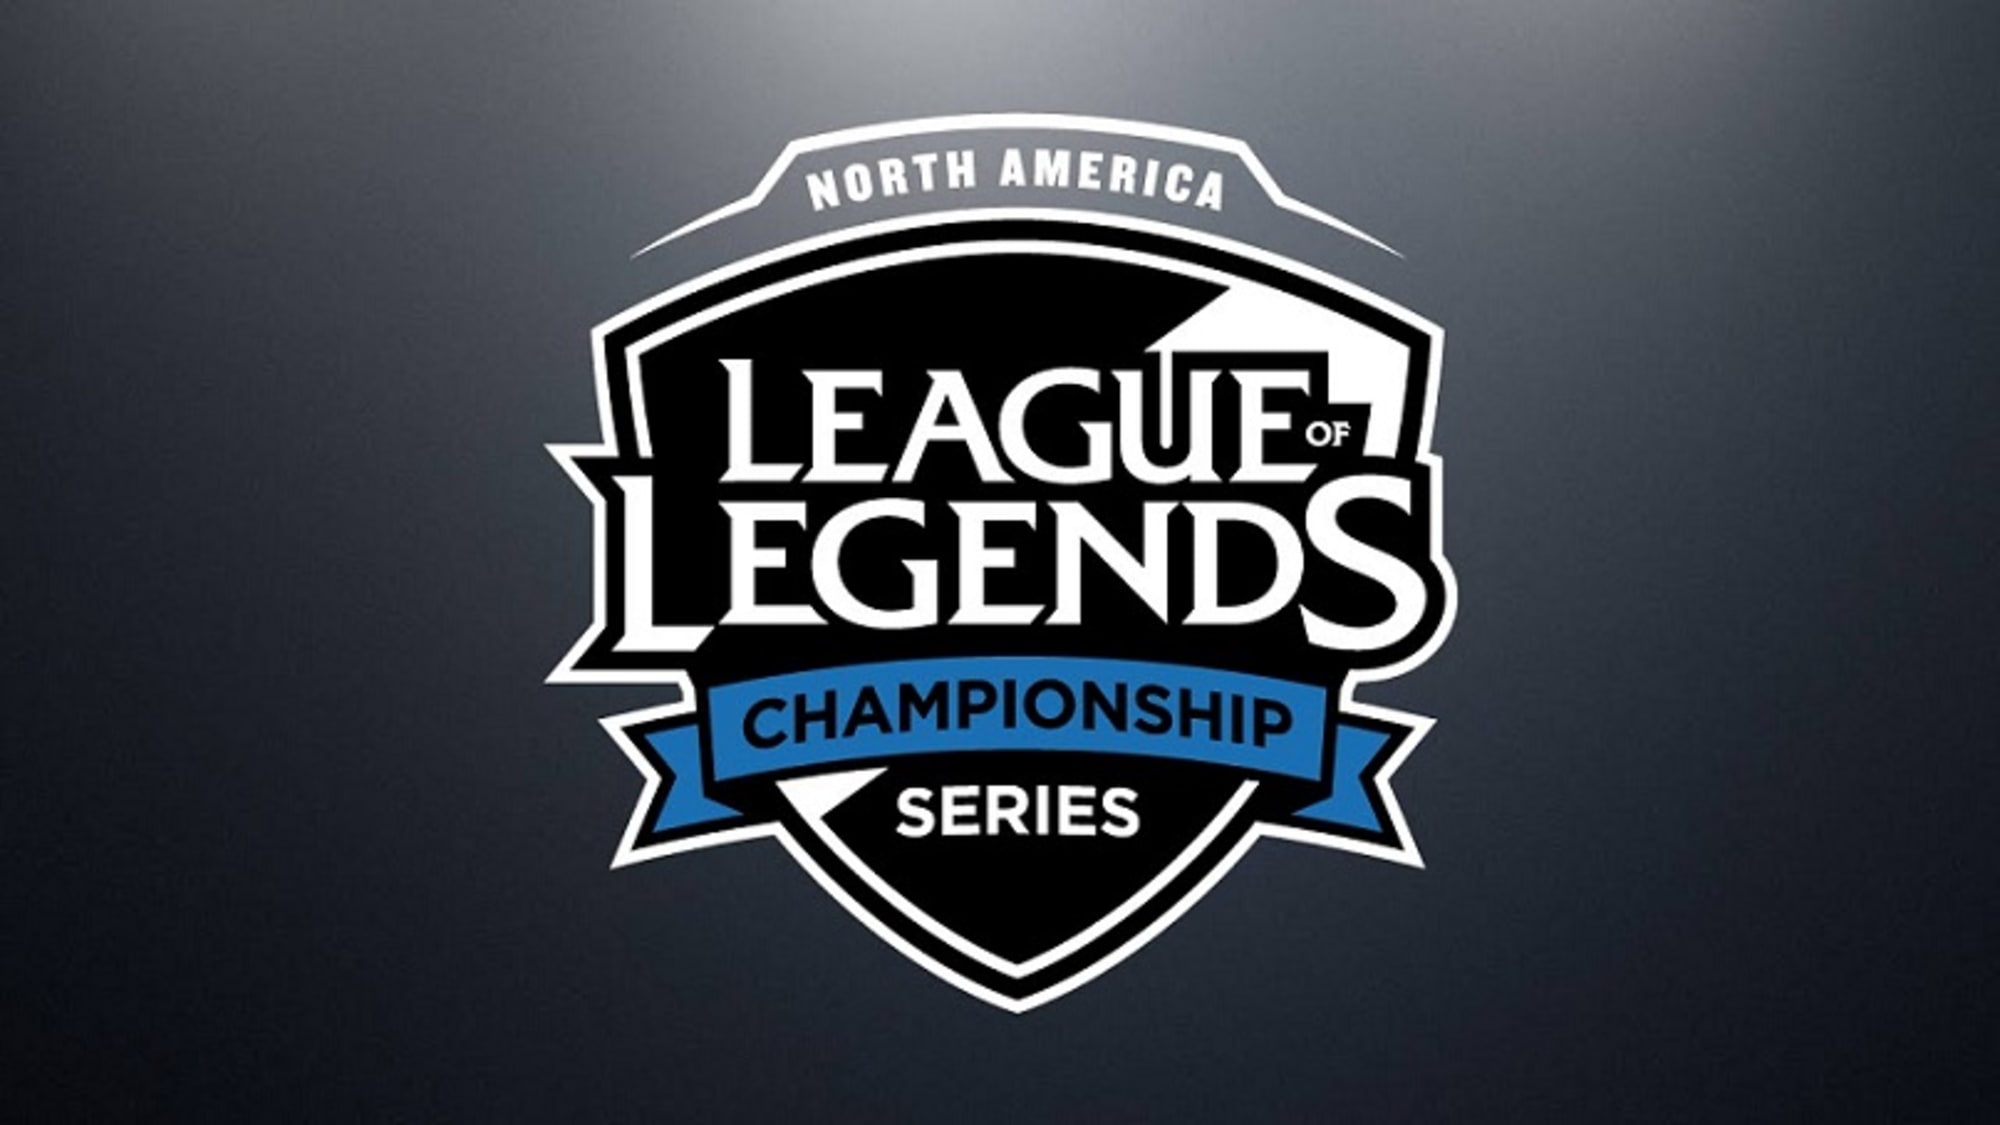 2016 NA LCS standings after Week 9 of the Summer Split